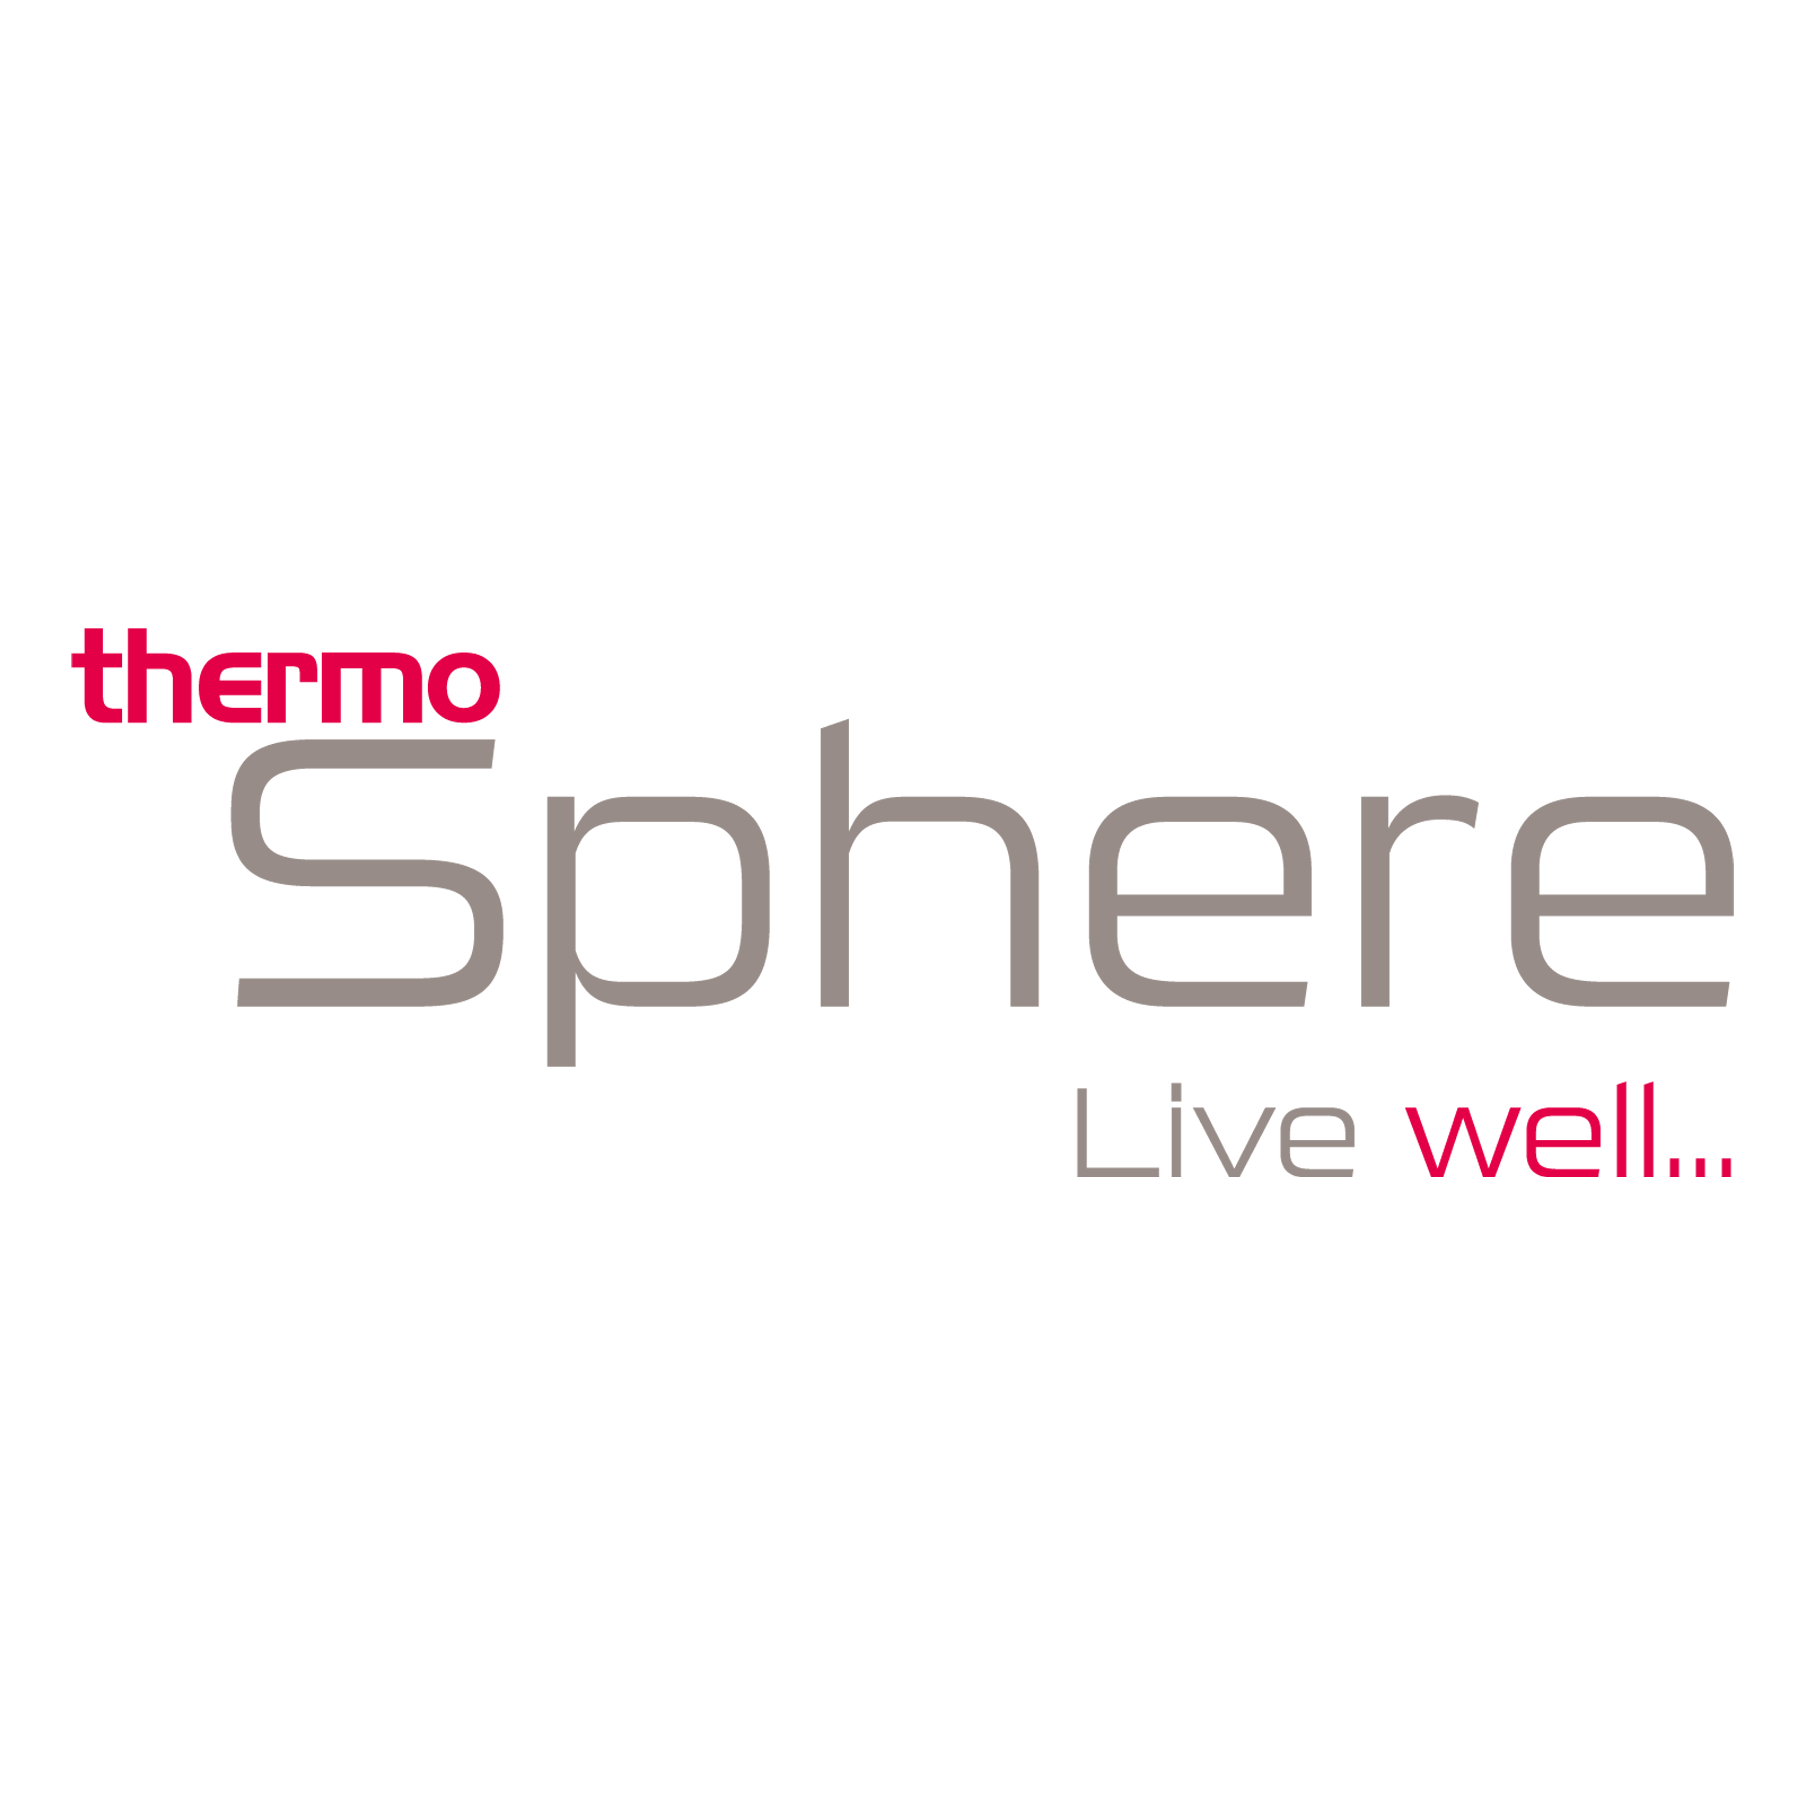 ThermoSphere - Thermostats - Electric underfloor heating